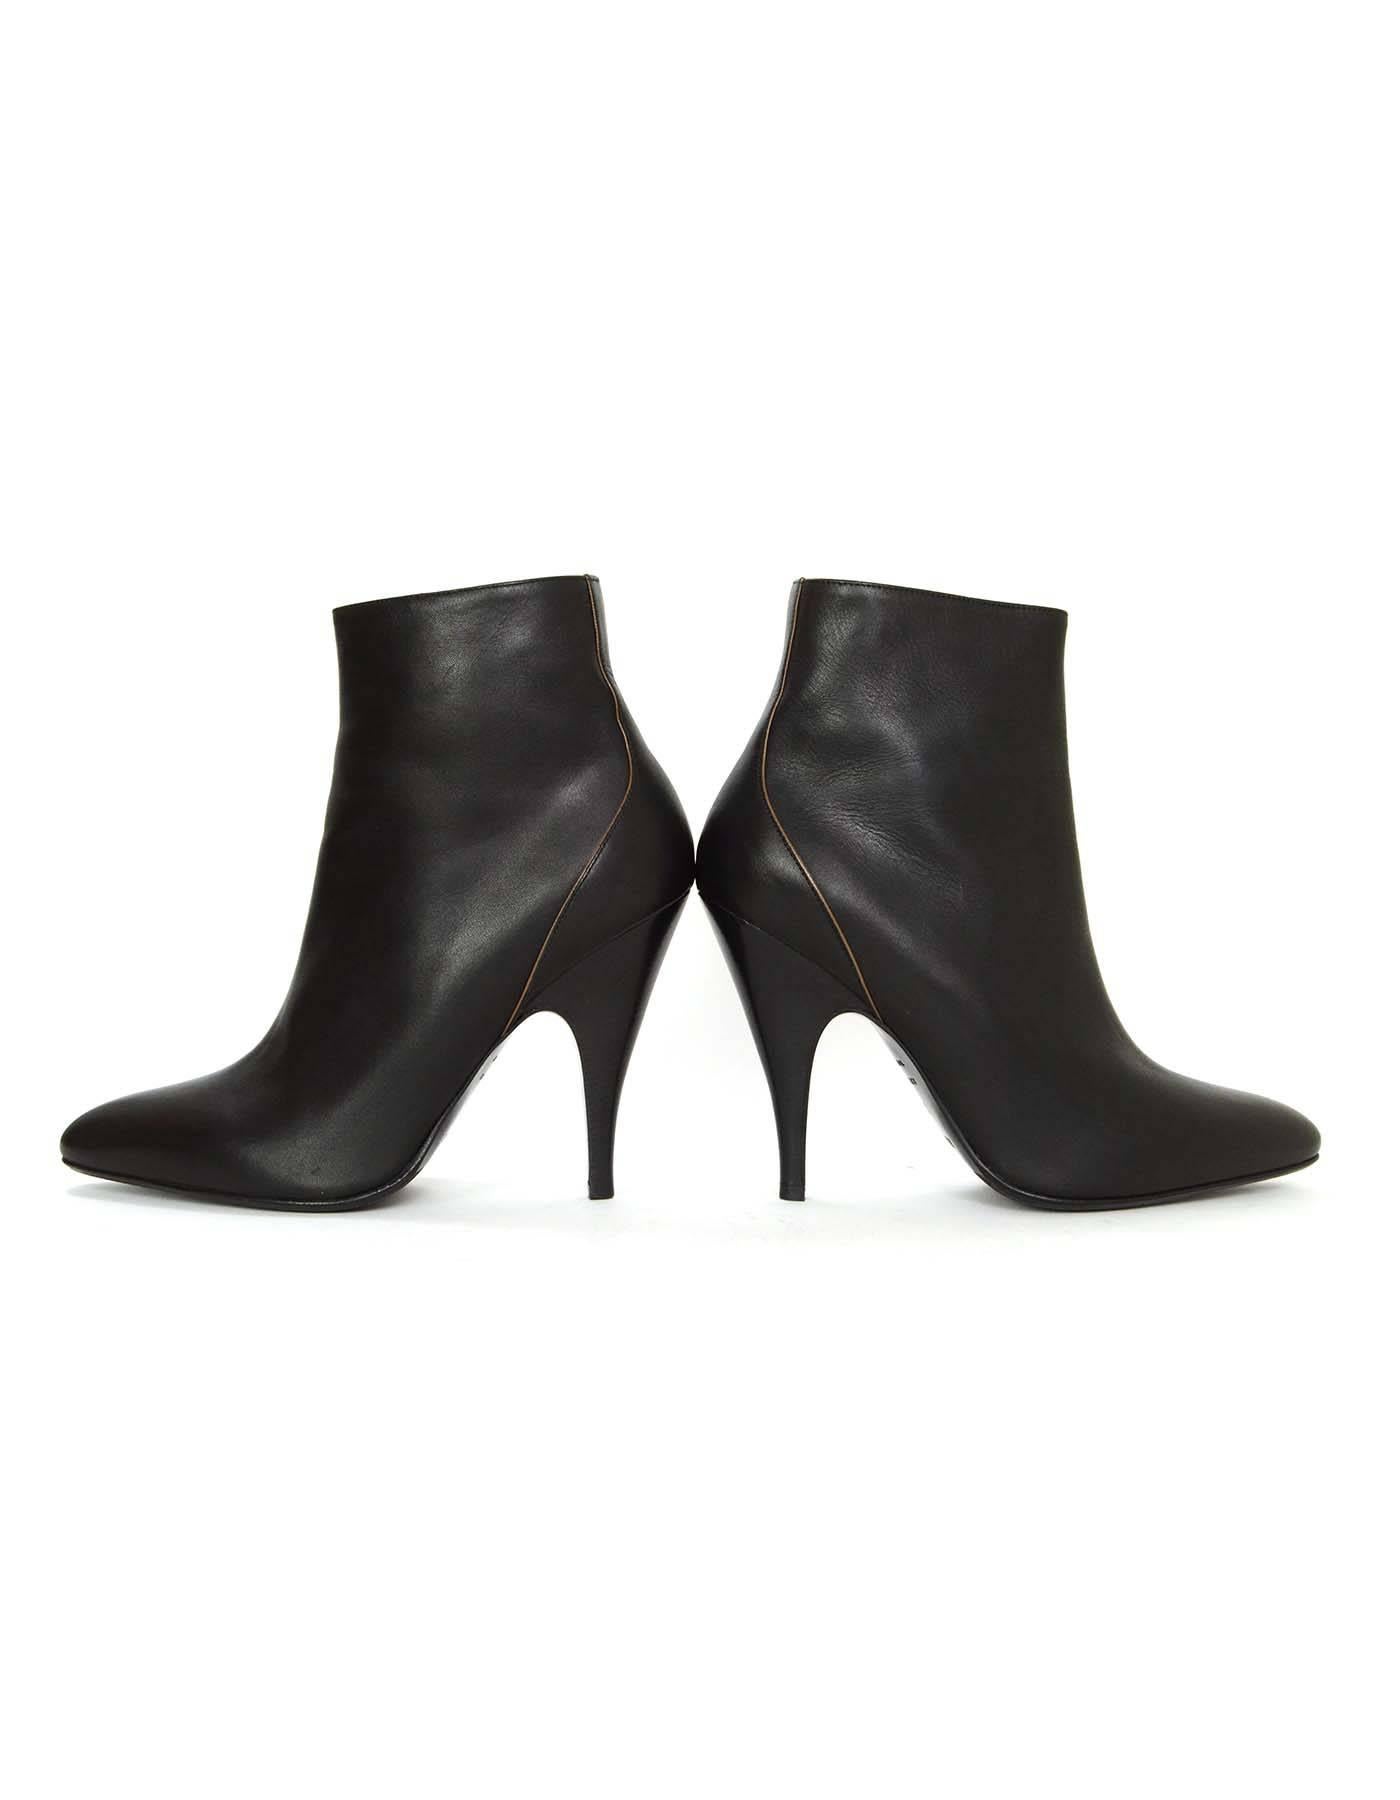 Hermes Black Leather Ankle Booties sz 37 2